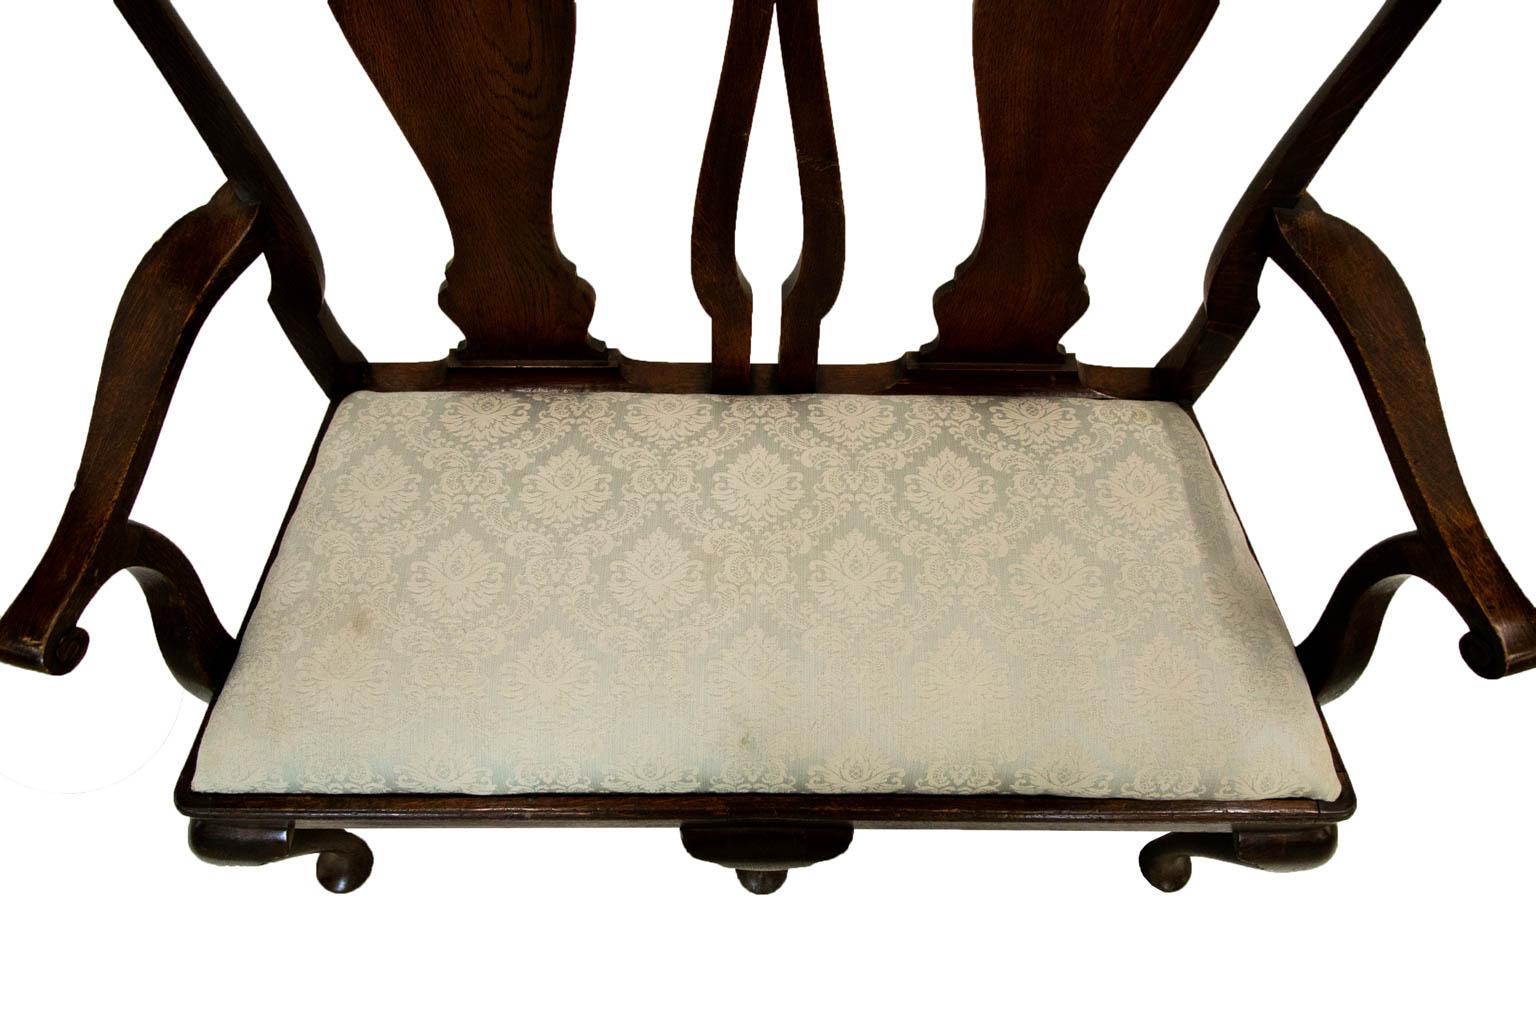 This settee has a shaped crest rail with vase back splats which are curved to make a comfortable contour for back support. The front edge has a shaped molding. The three cabriole legs in the front are interconnected with an elaborate system of